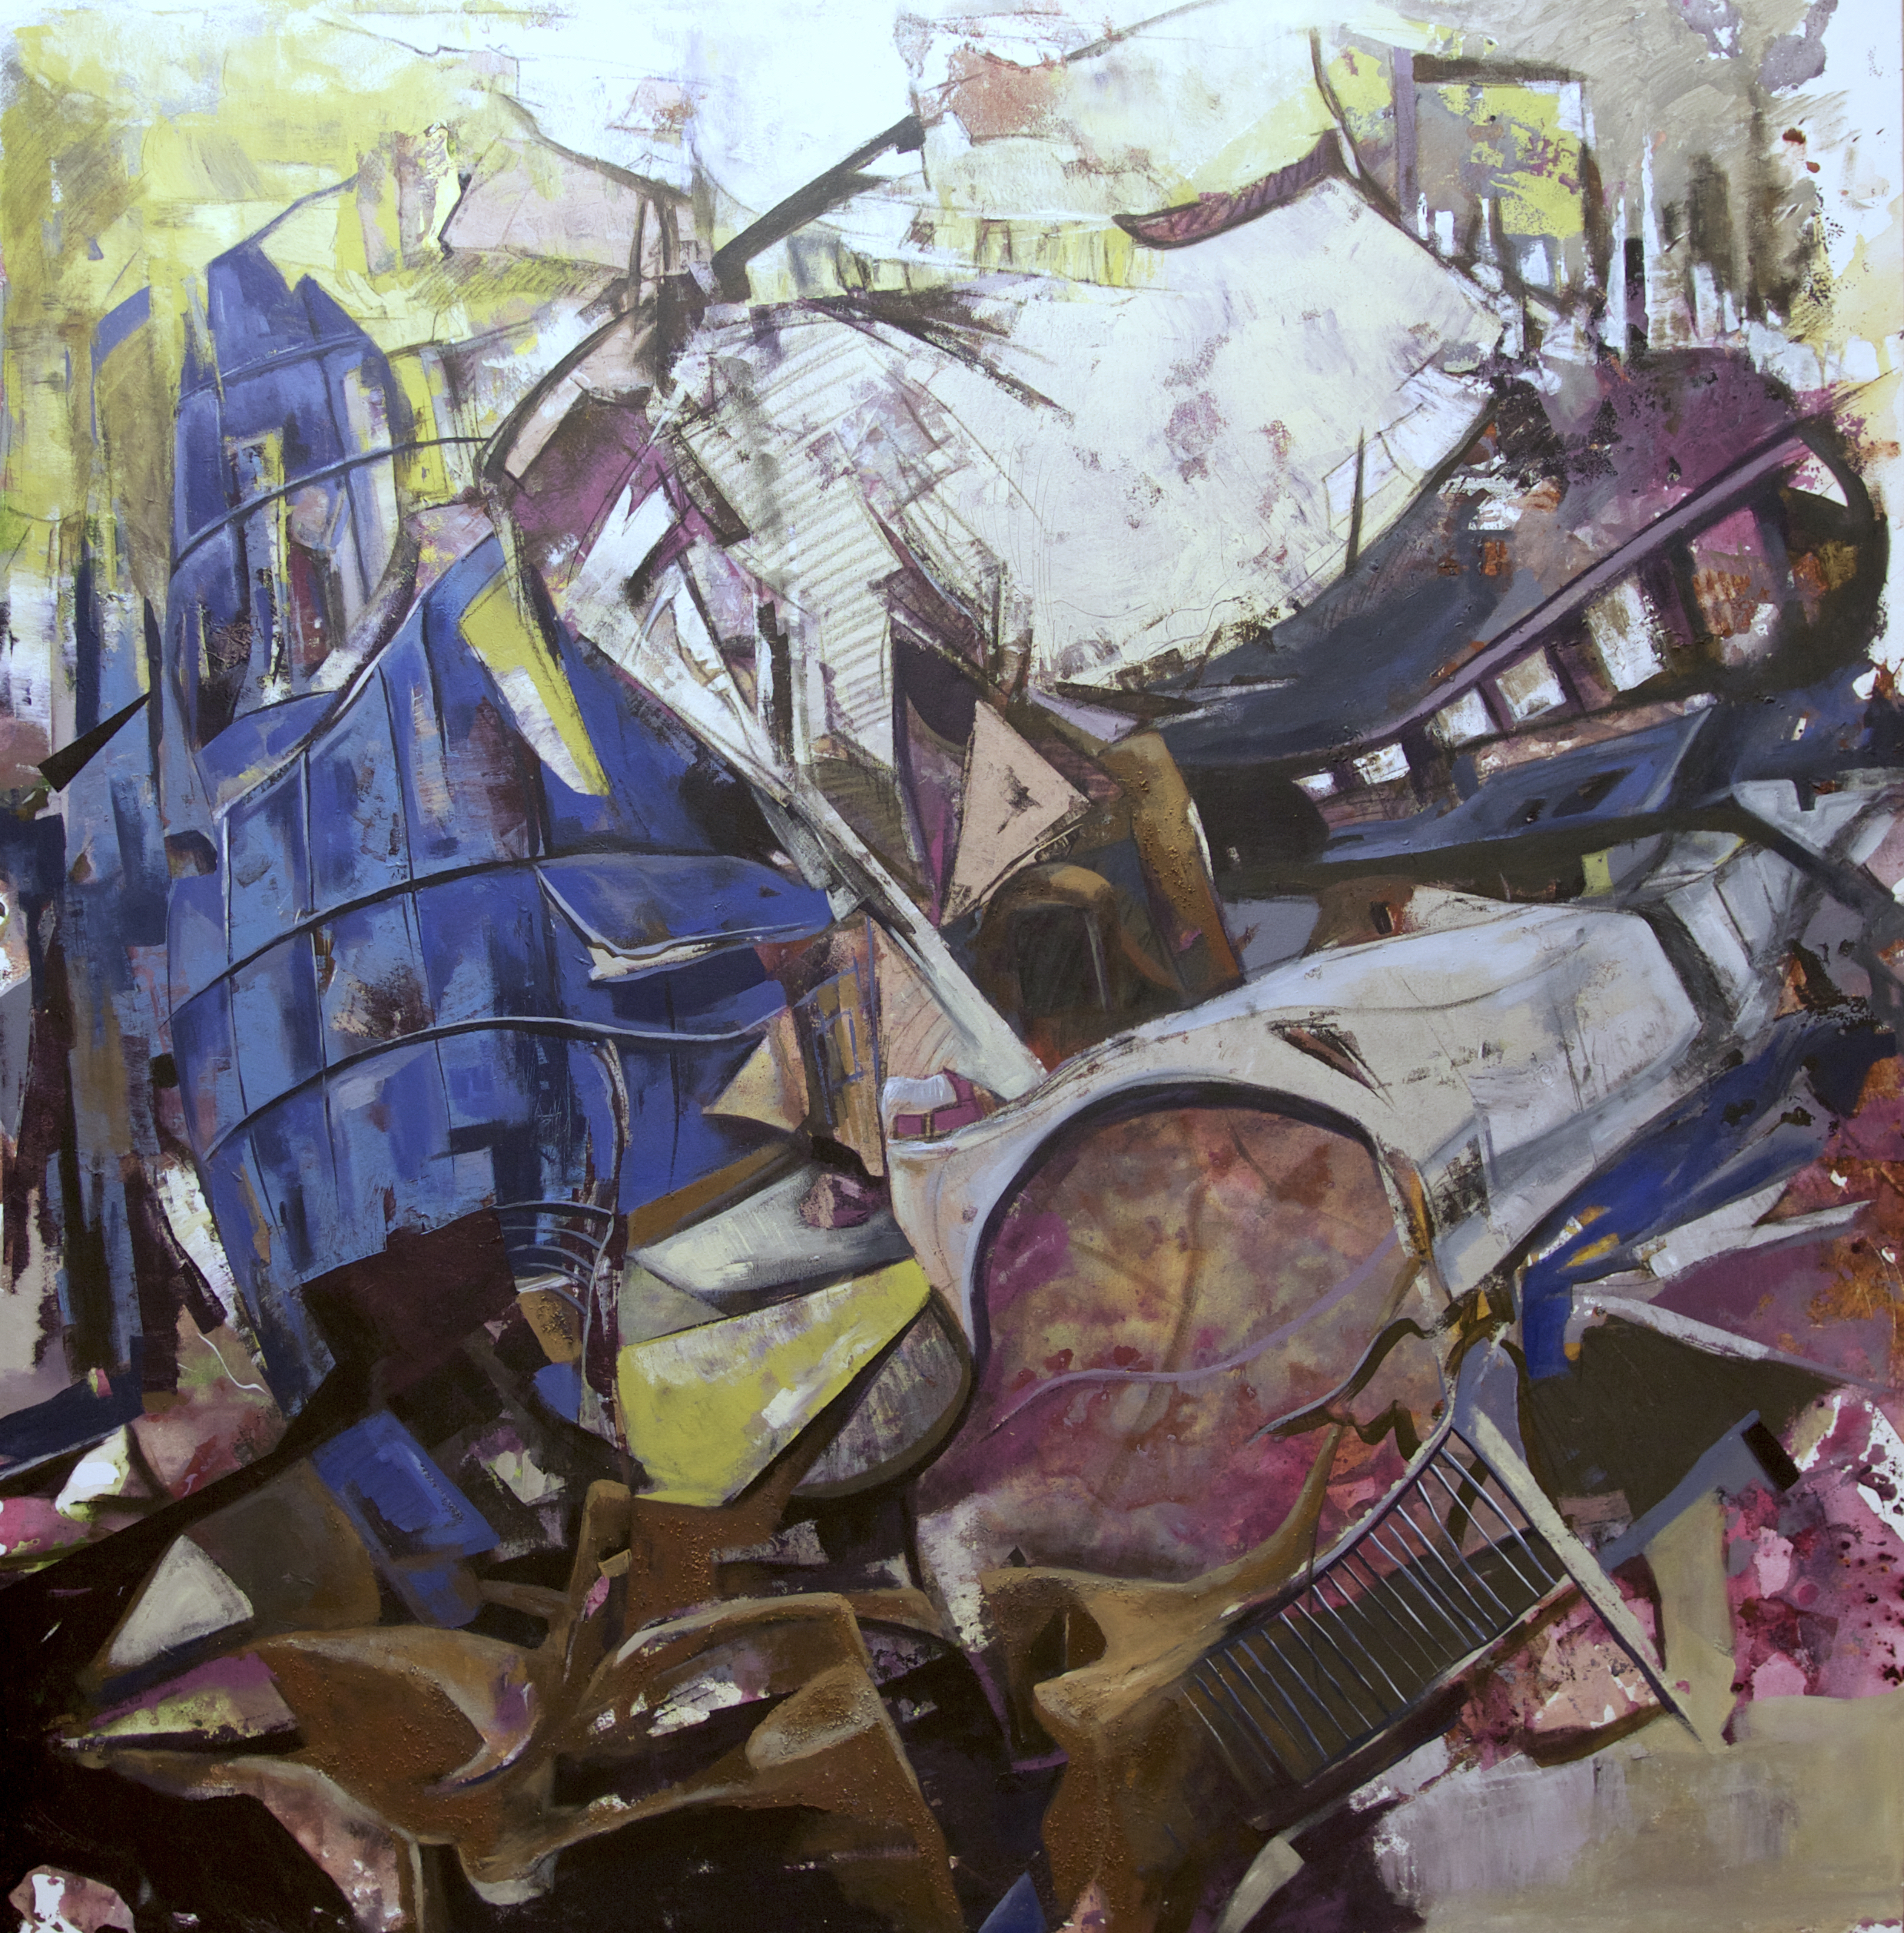 City #58, acrylic on canvas, 73x68 inches, 2013